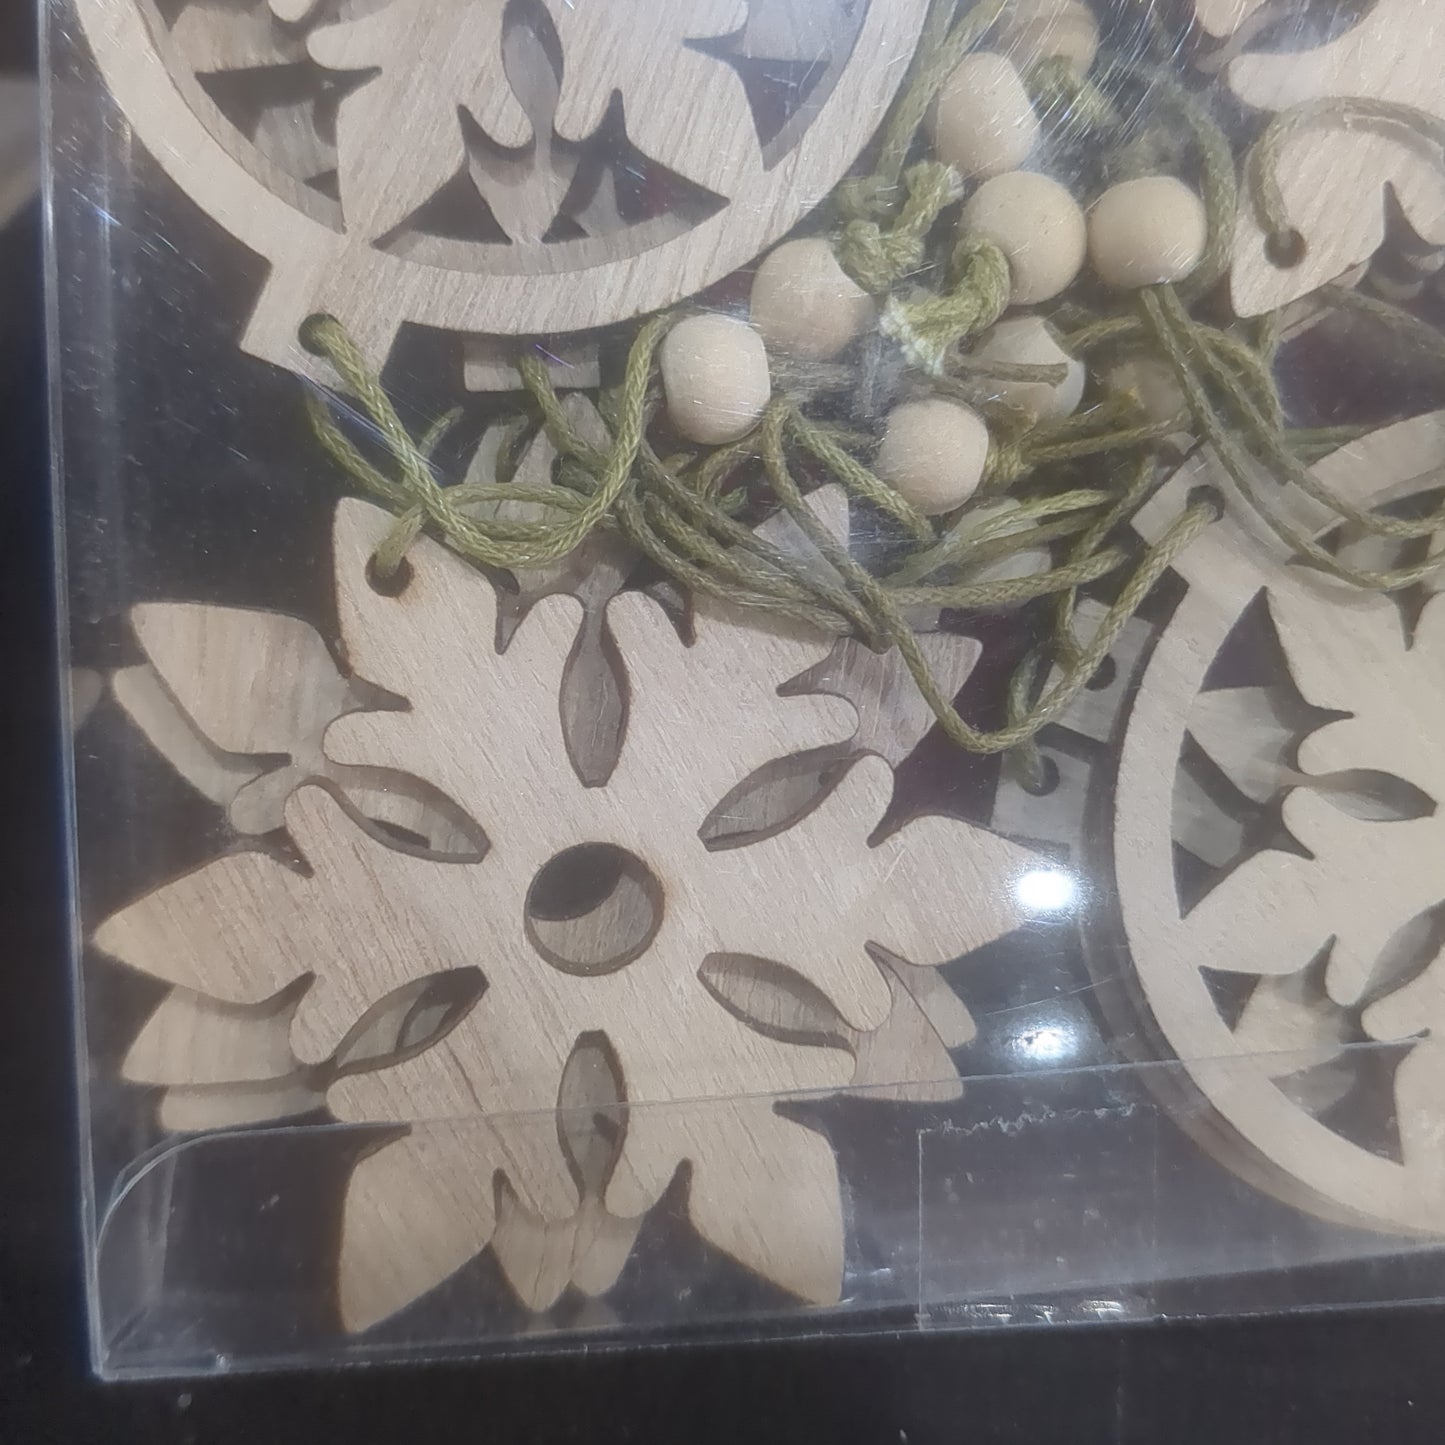 Wooden Snowflake Ornament Set Of 12